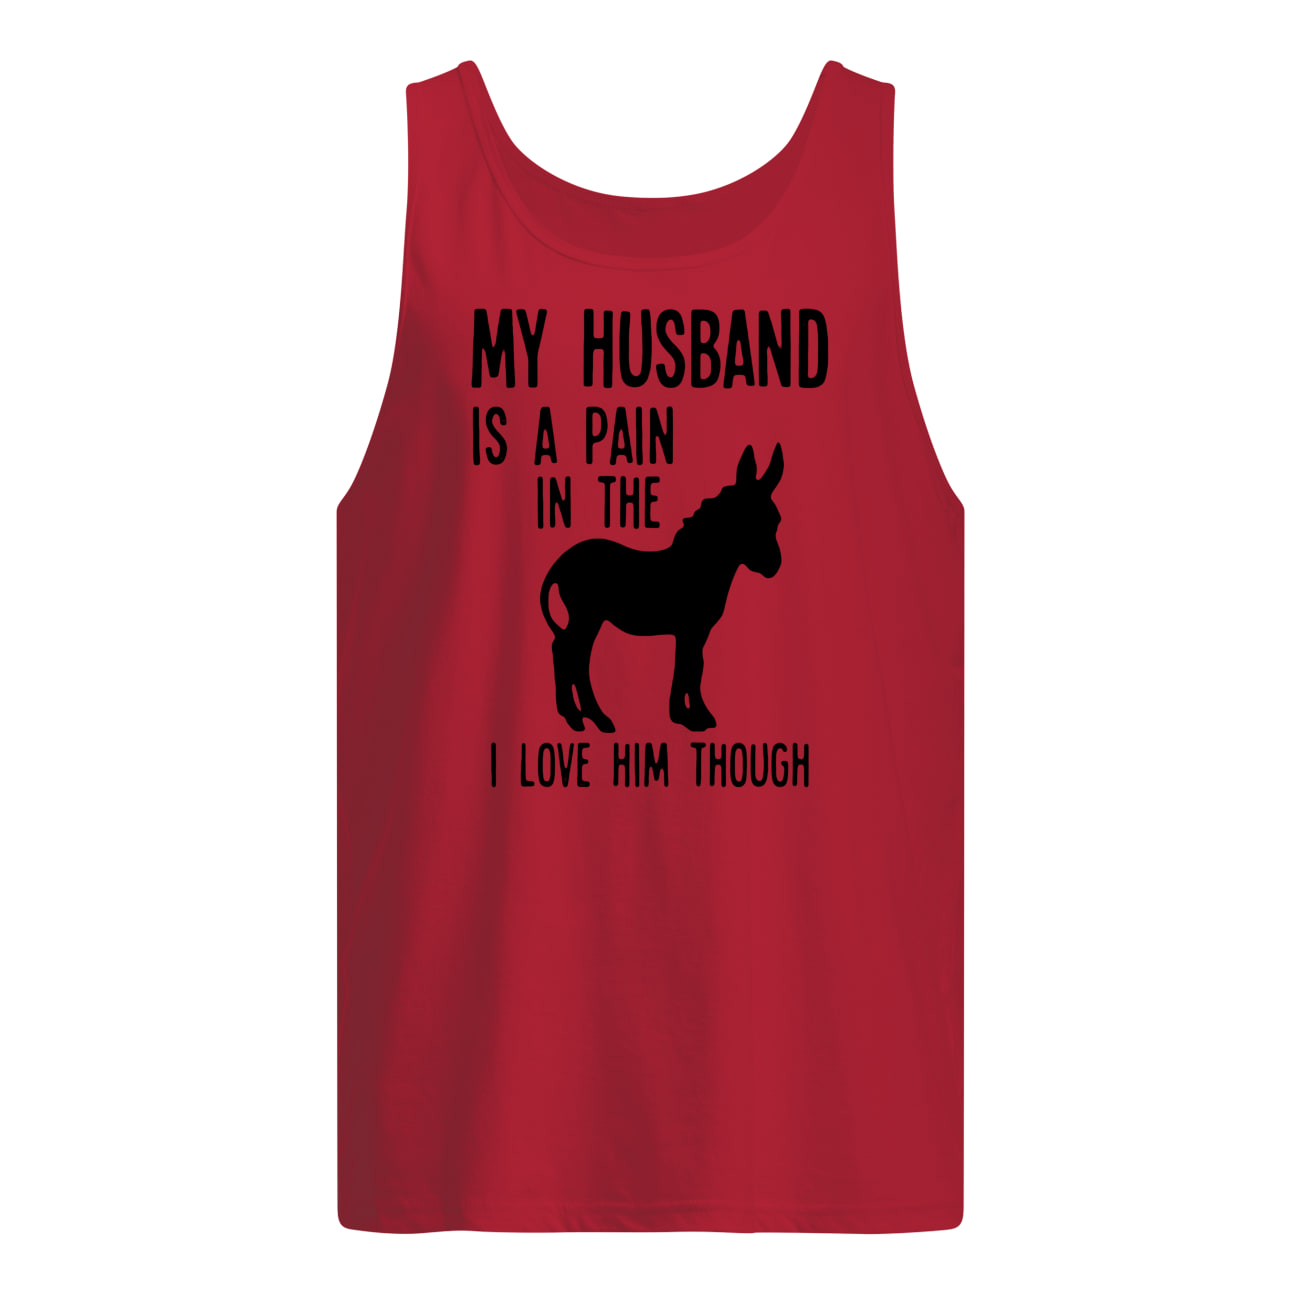 My husband is a pain in the donkey I love him though tank top